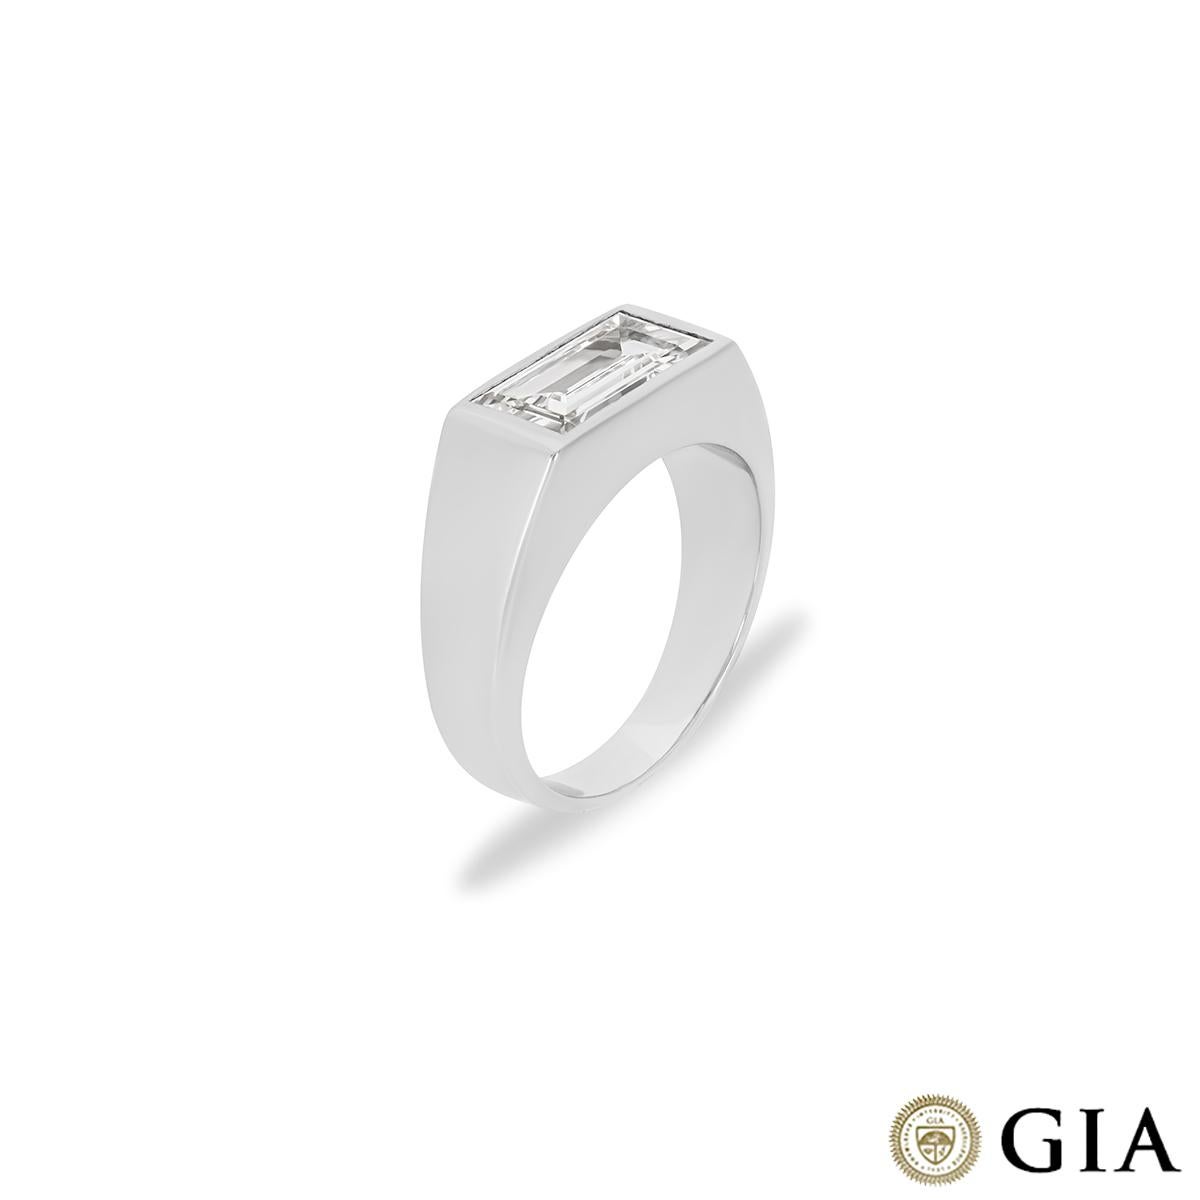 An intriguing platinum diamond dress ring. The ring is set with a baguette cut diamond bezel set in an East-West mount weighing 1.98ct, J colour and SI2 clarity. The ring tapers from 8mm to 4mm wide, has a gross weight of 17.92 grams and is